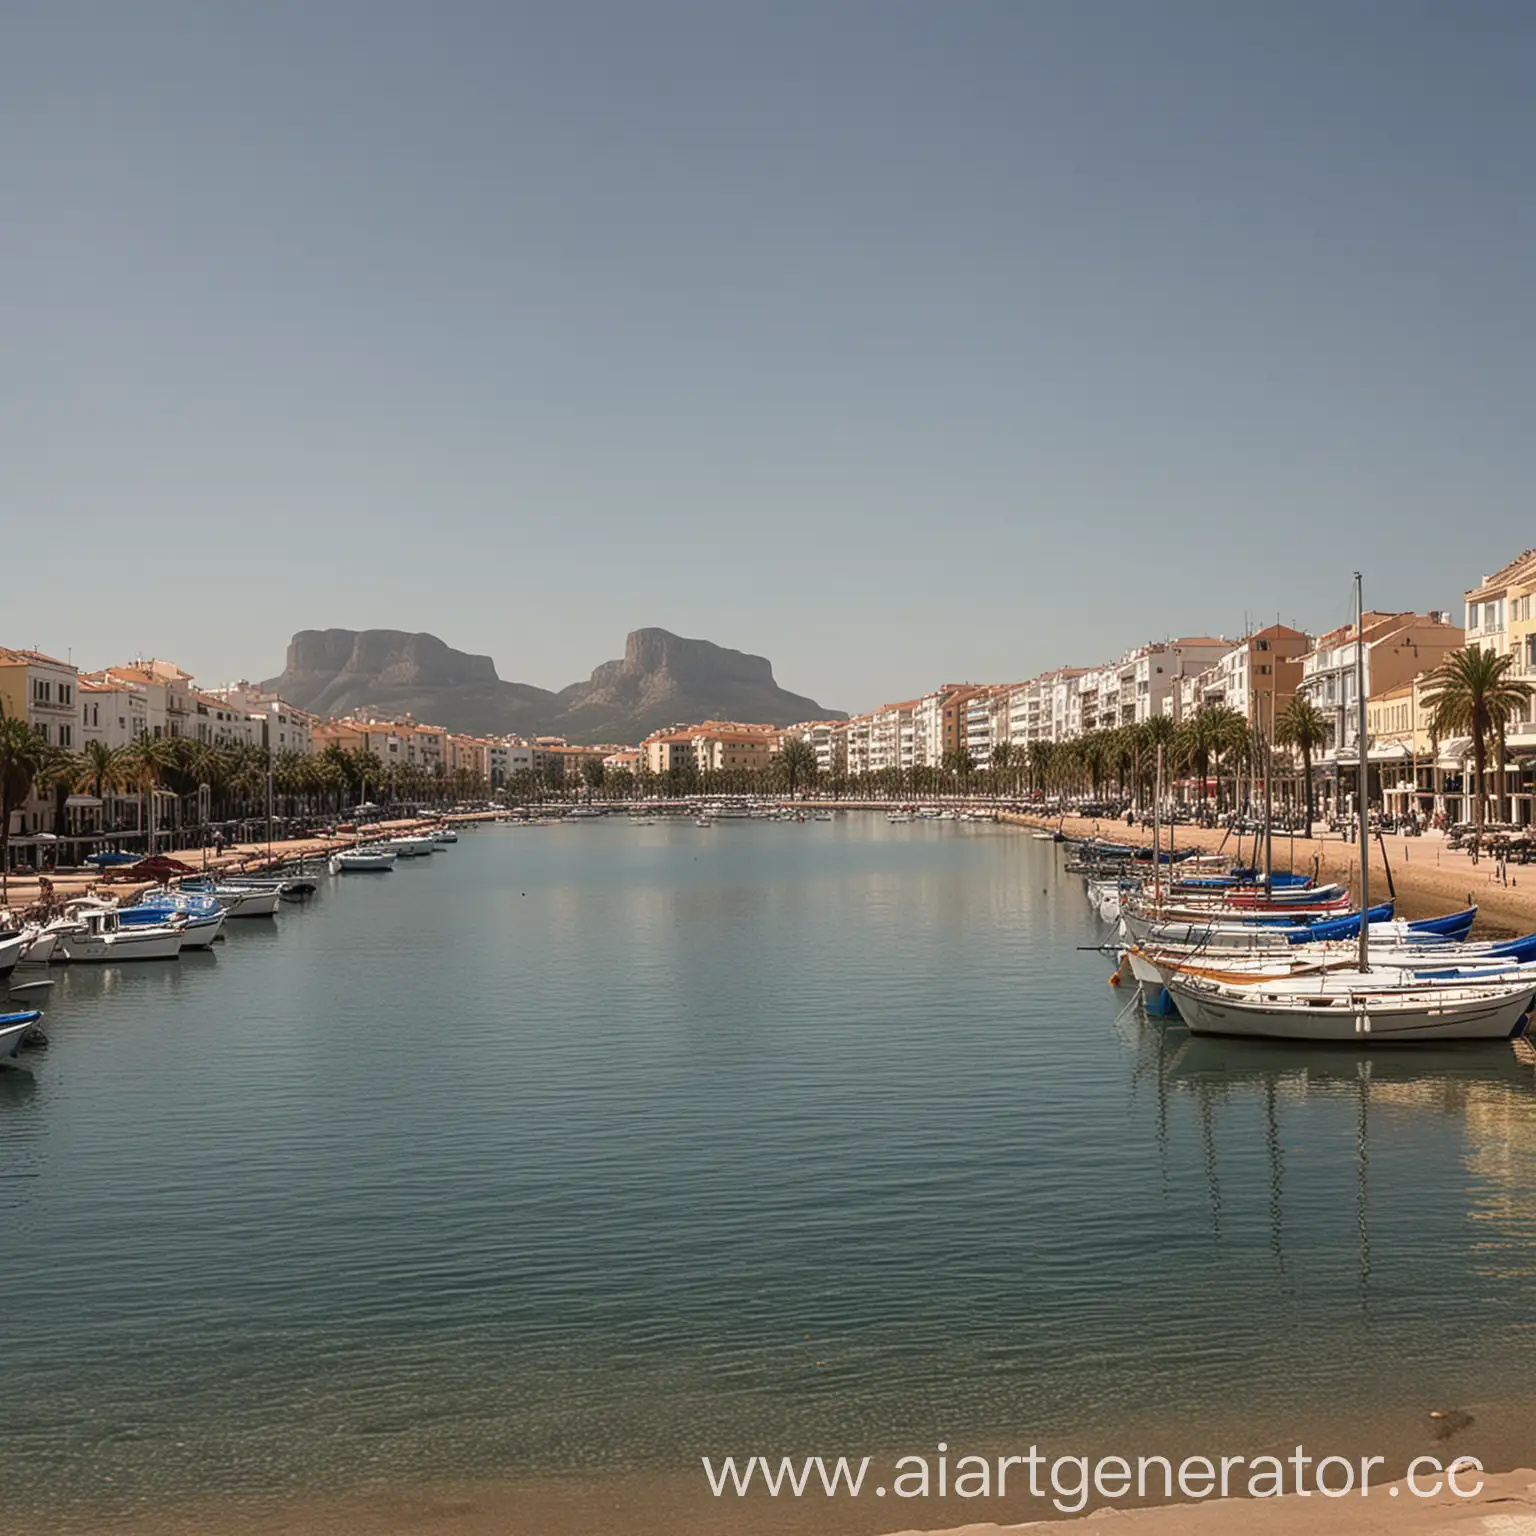 Scenic-View-of-Denia-City-in-Spain-with-Coastal-Landscape-and-Historic-Architecture